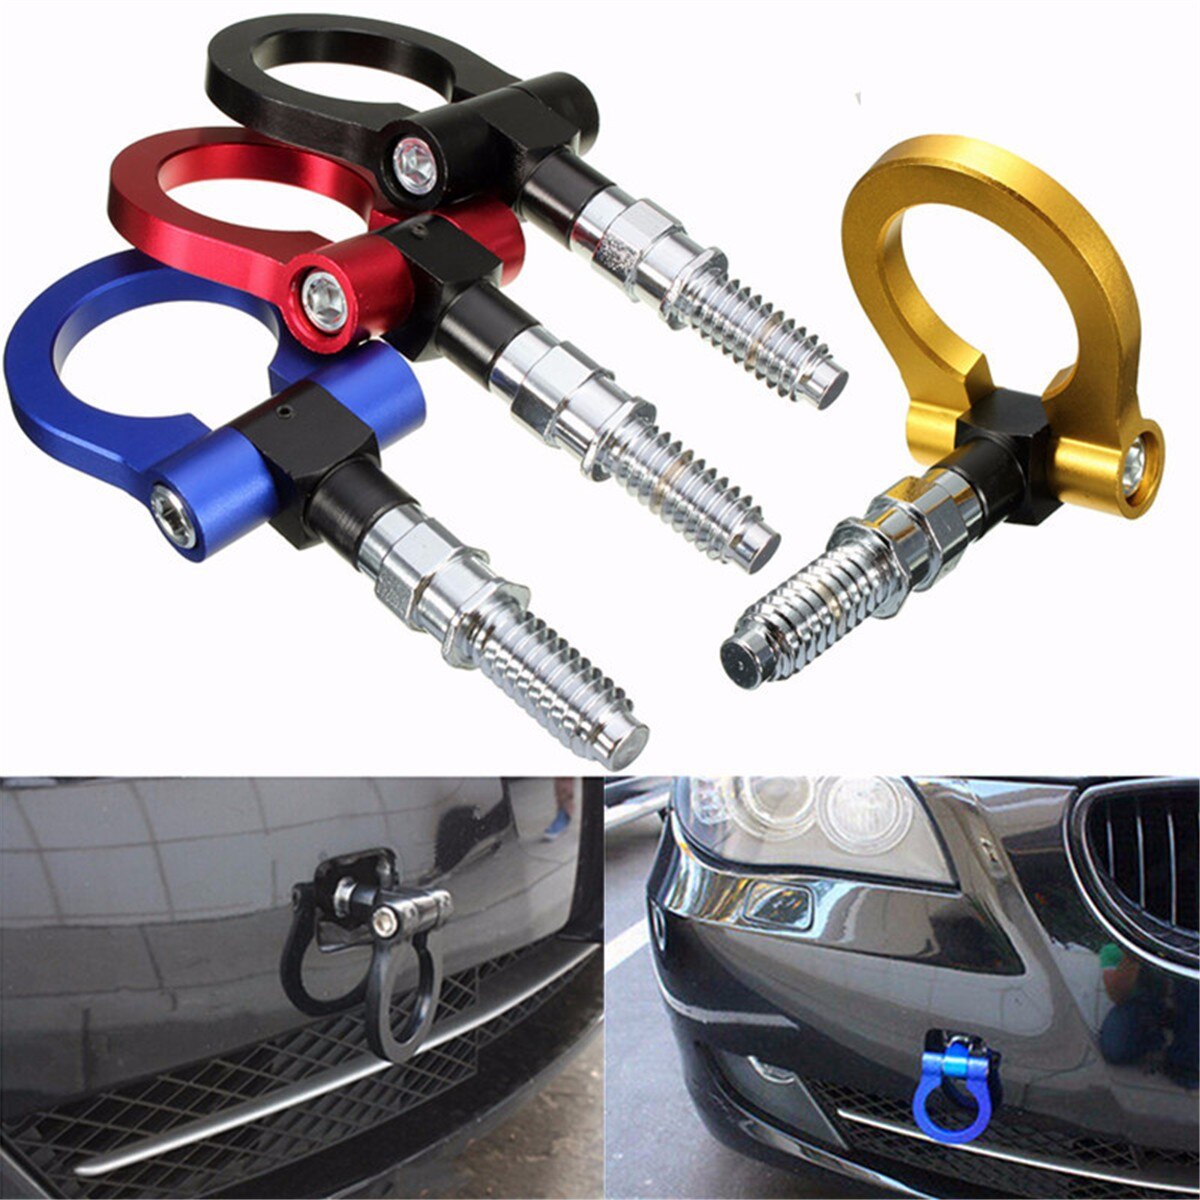 Universal Aluminum Racing Tow Hook Towing Trailer Ring for European Cars Blue Red Golden Black Silver Towing Bars